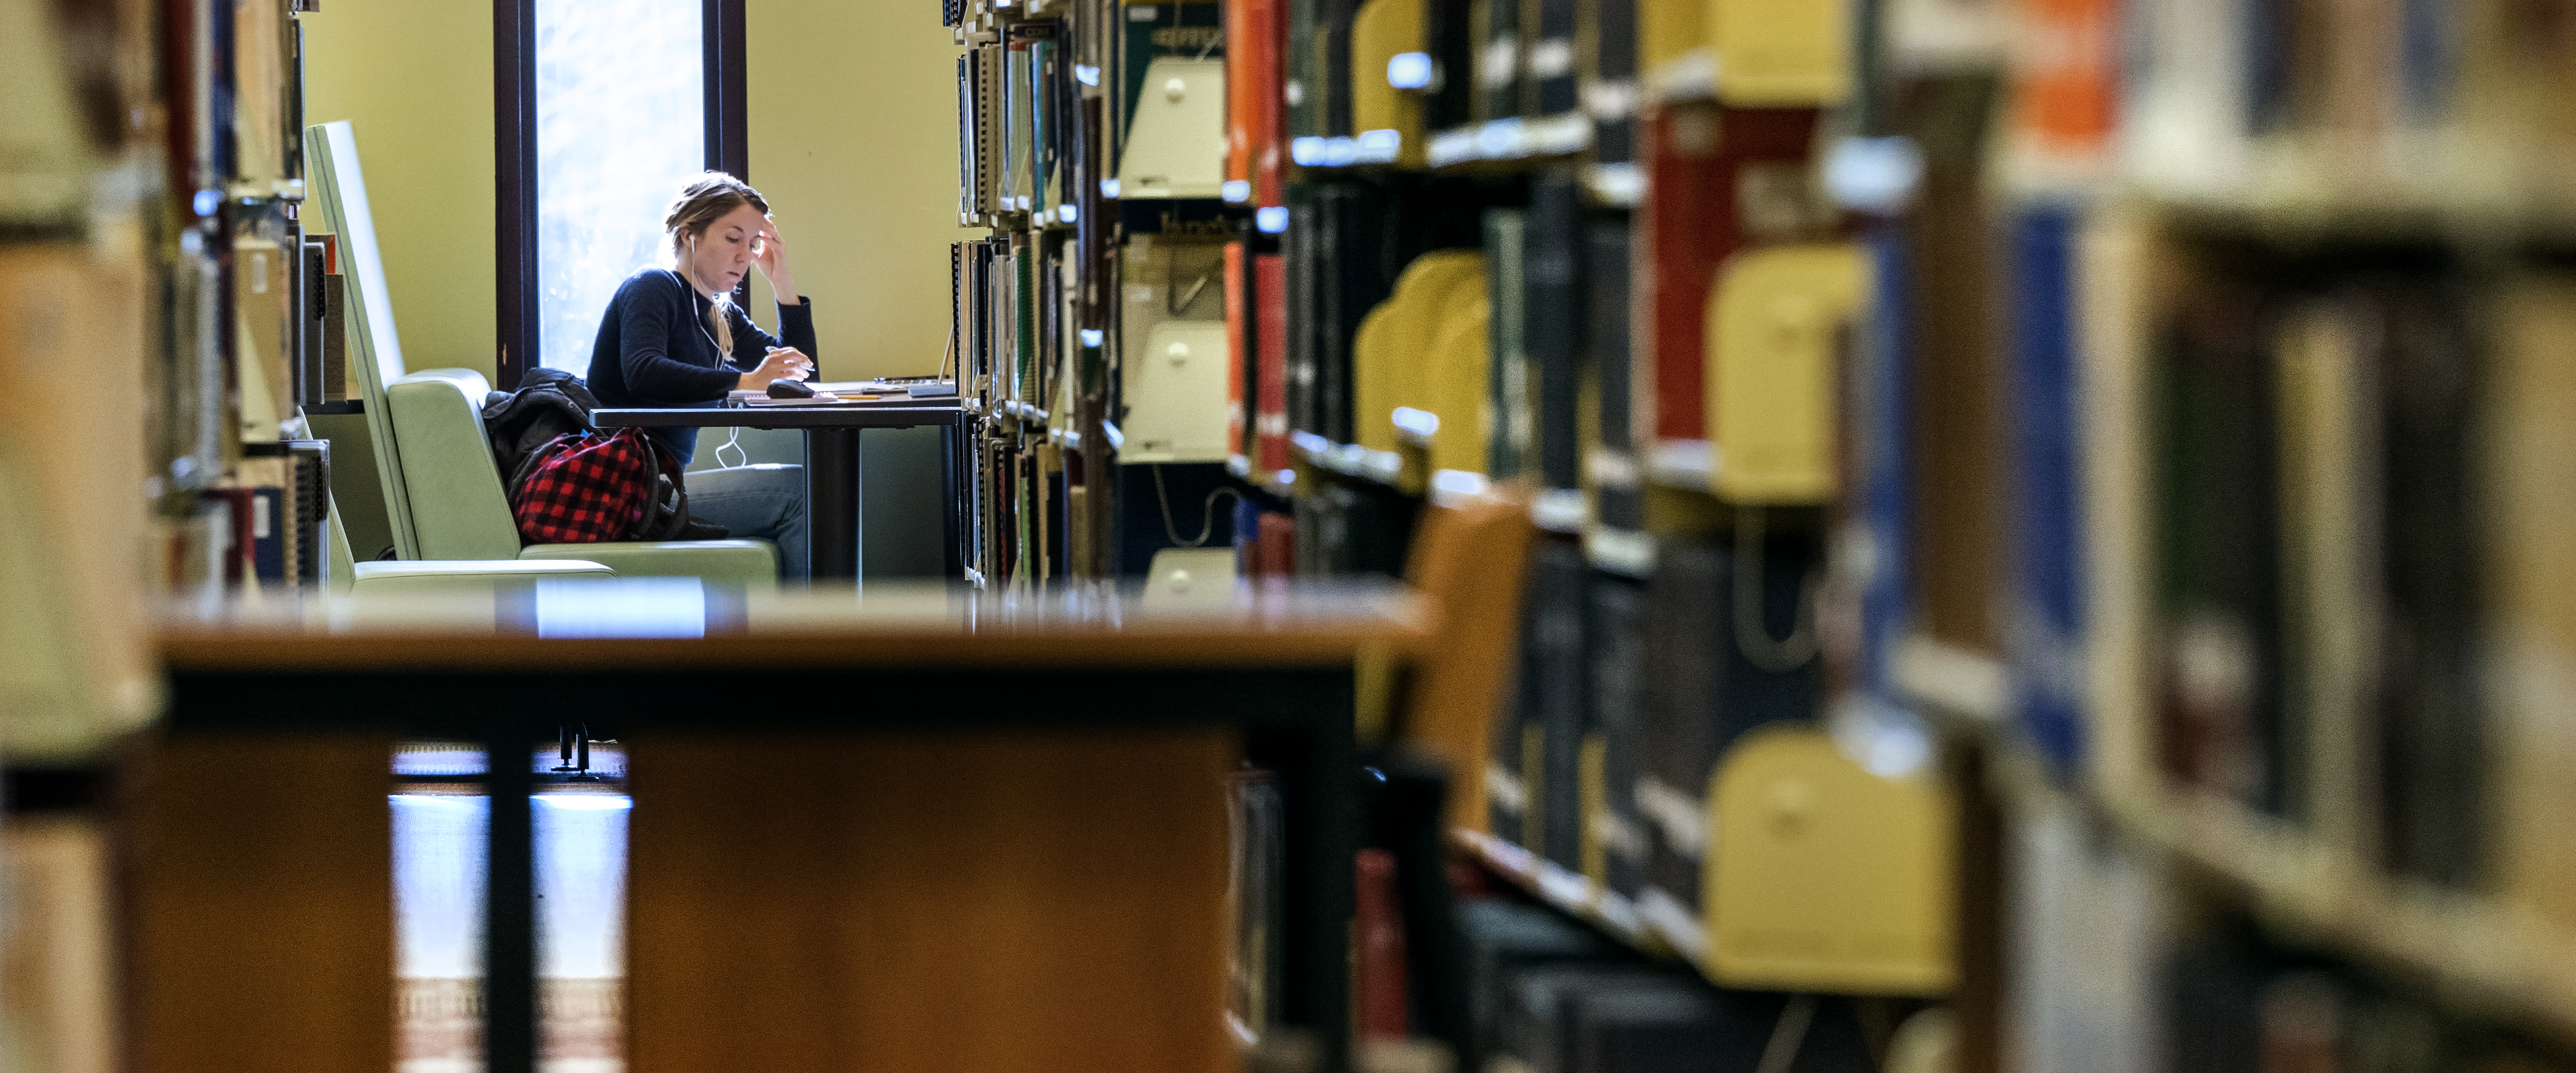 A student sits a table, near a window in a library, studying.